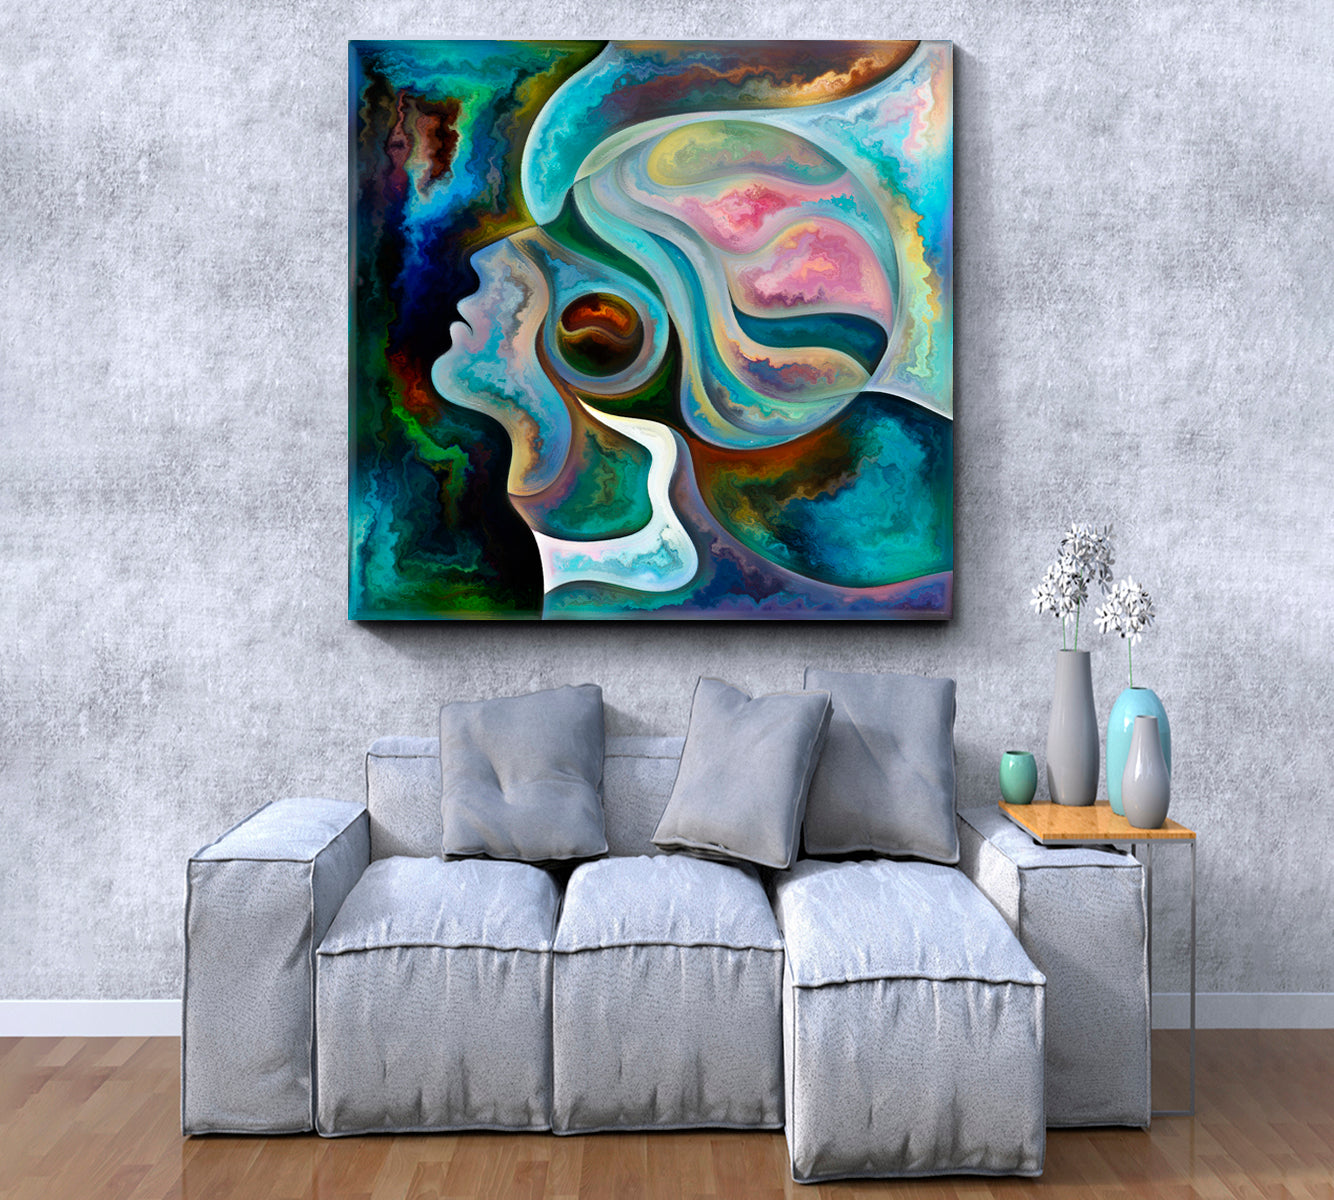 SPECTRAL FLOW Artistic Colorful Shapes Forms Swirls Modern Art Consciousness Art Artesty   